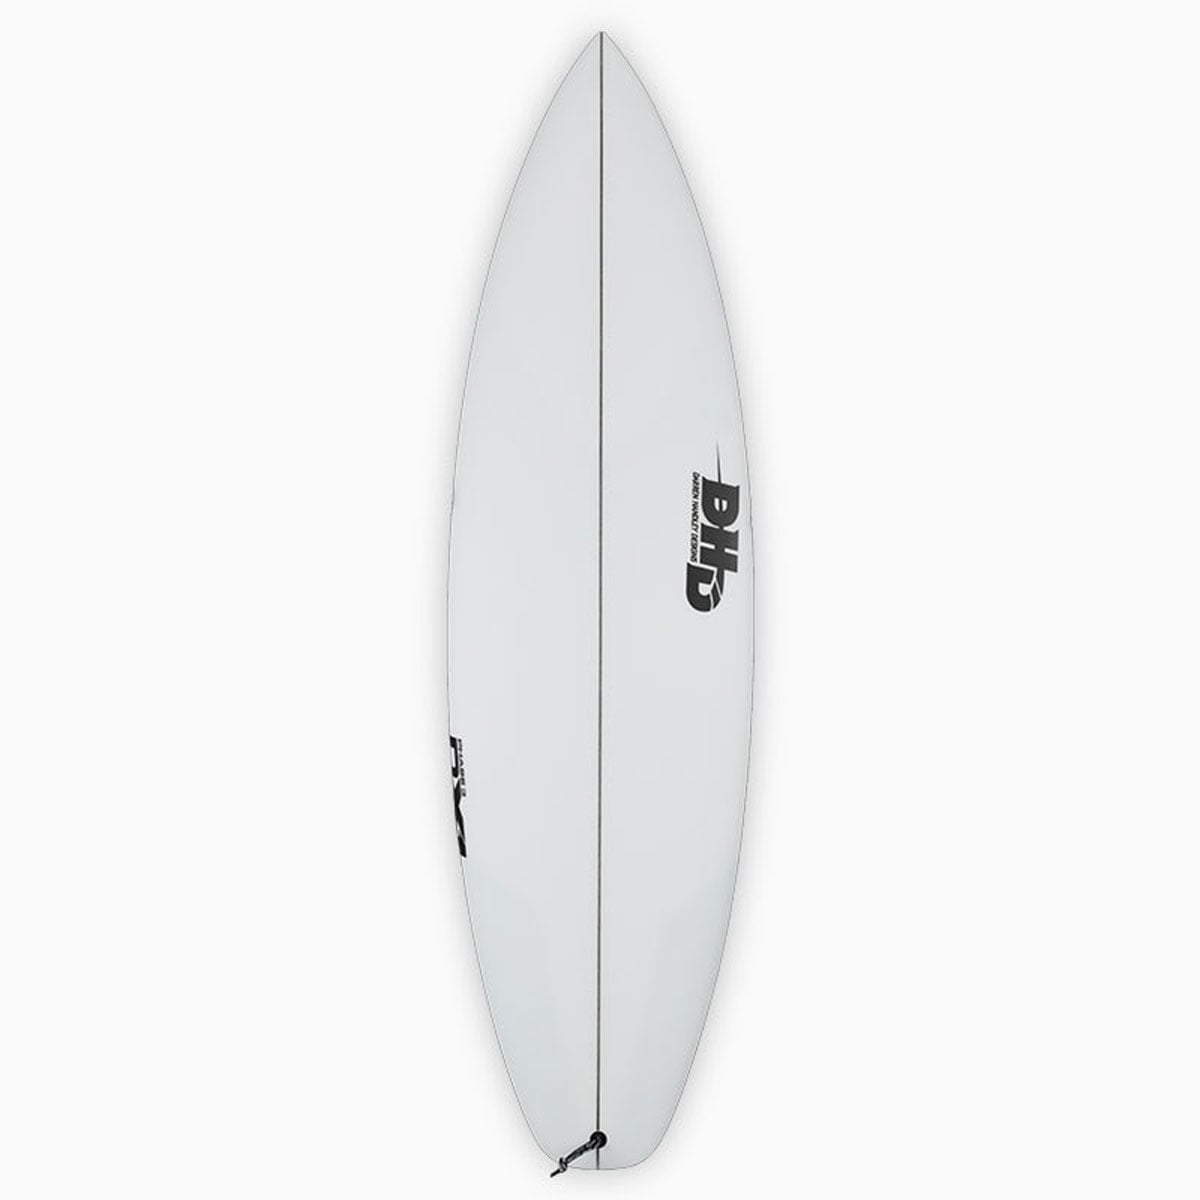 DHD SURFBOARDS DX1 PHASE3 ダレンハンドレーデザイン ディーエックス1 フェーズ3 ショートボード パフォーマンスショート  FCS2 サーフボード トライフィン クリア 5.9